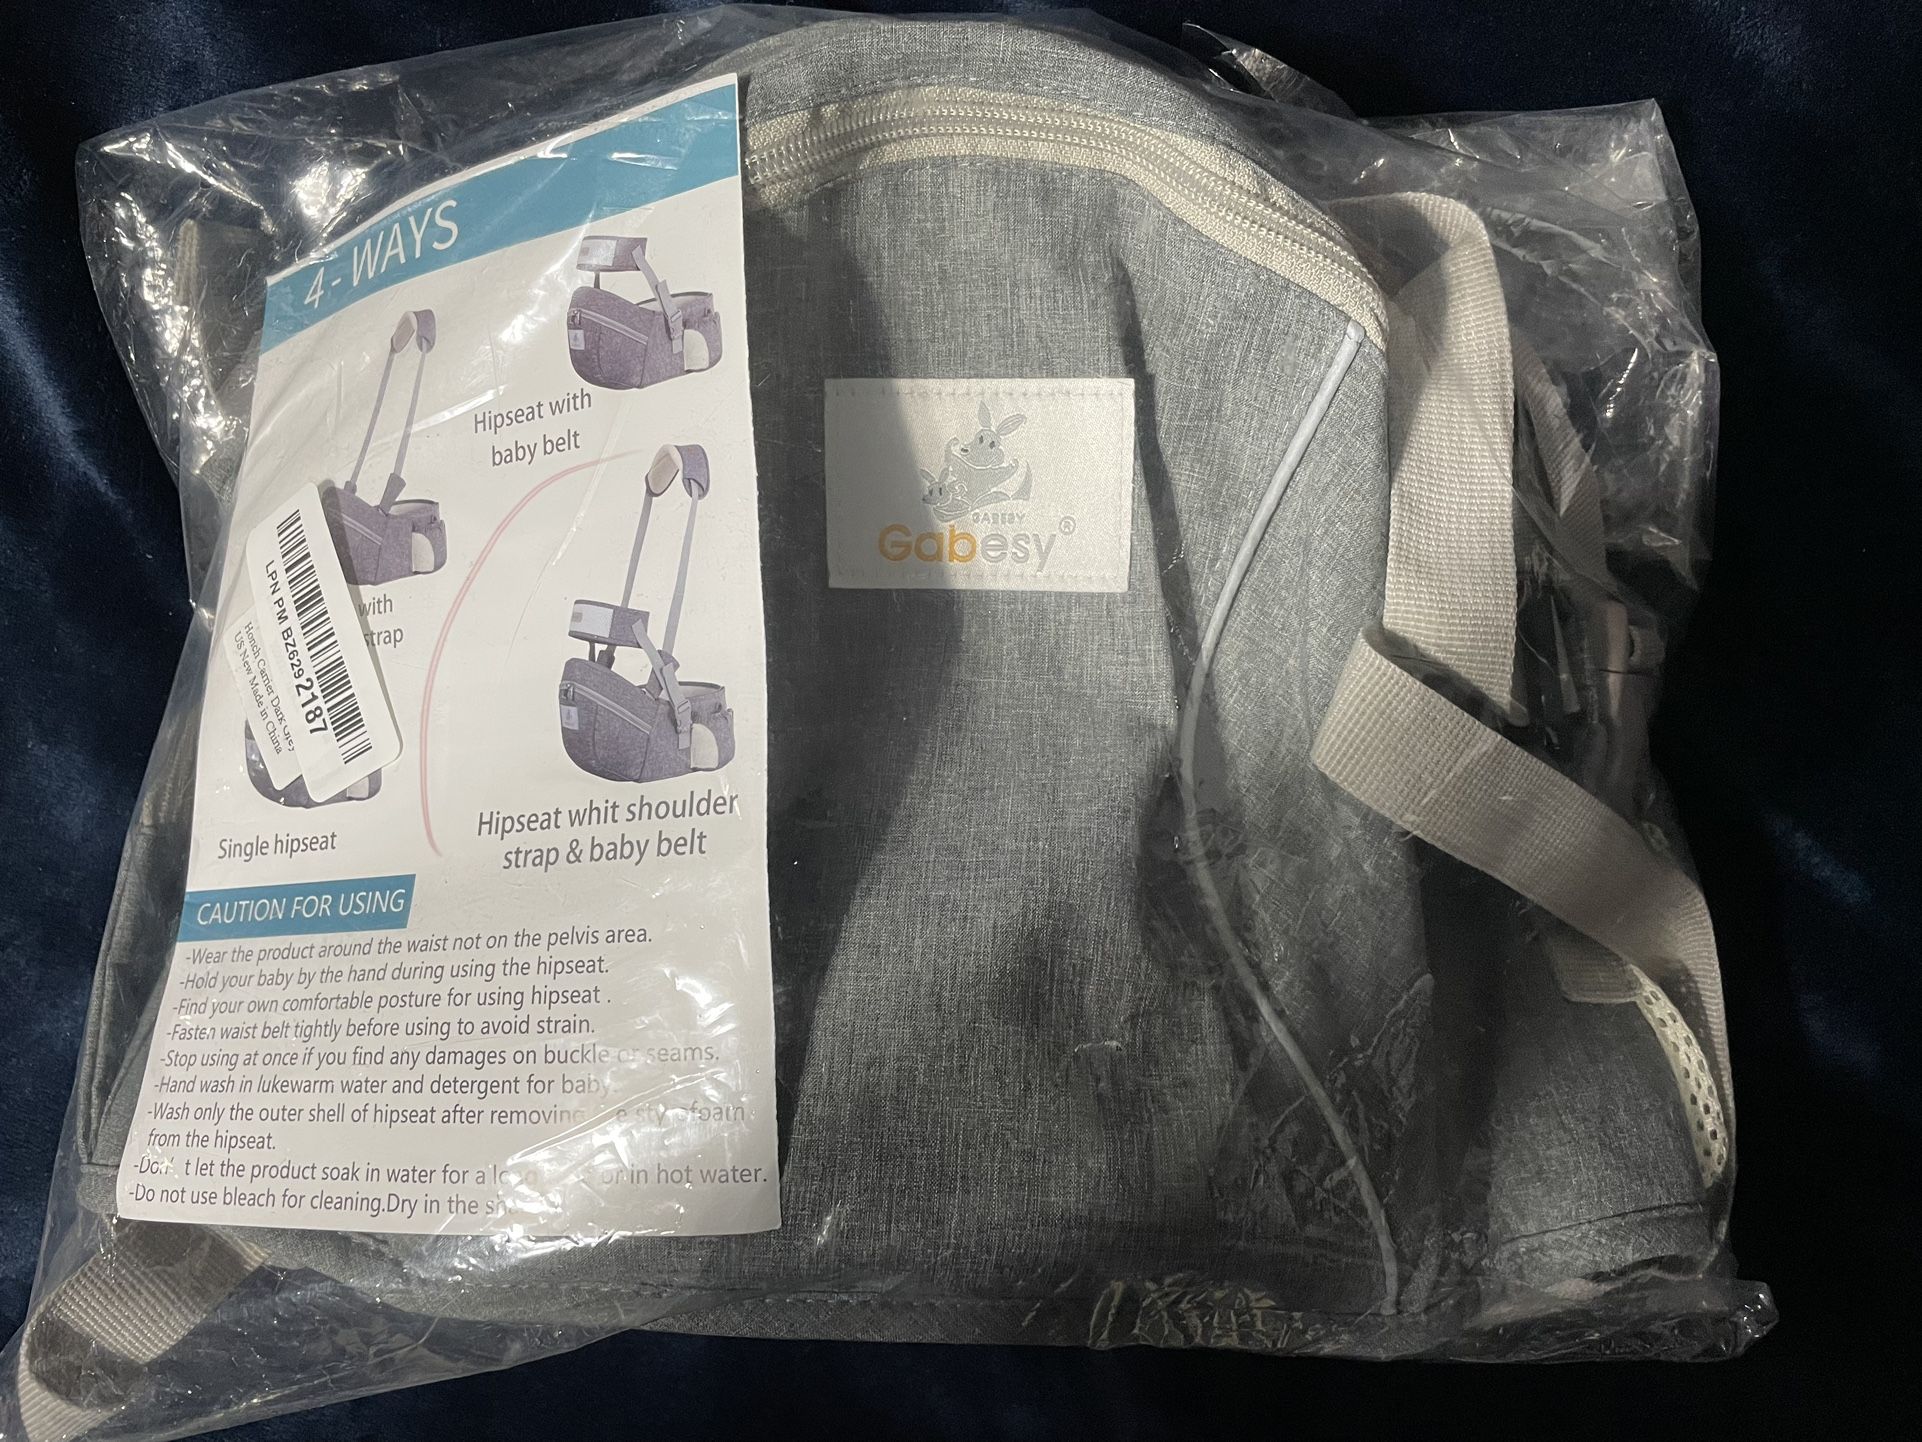 Grey Gabesy Baby Hip Carrier With Frontal Backpack